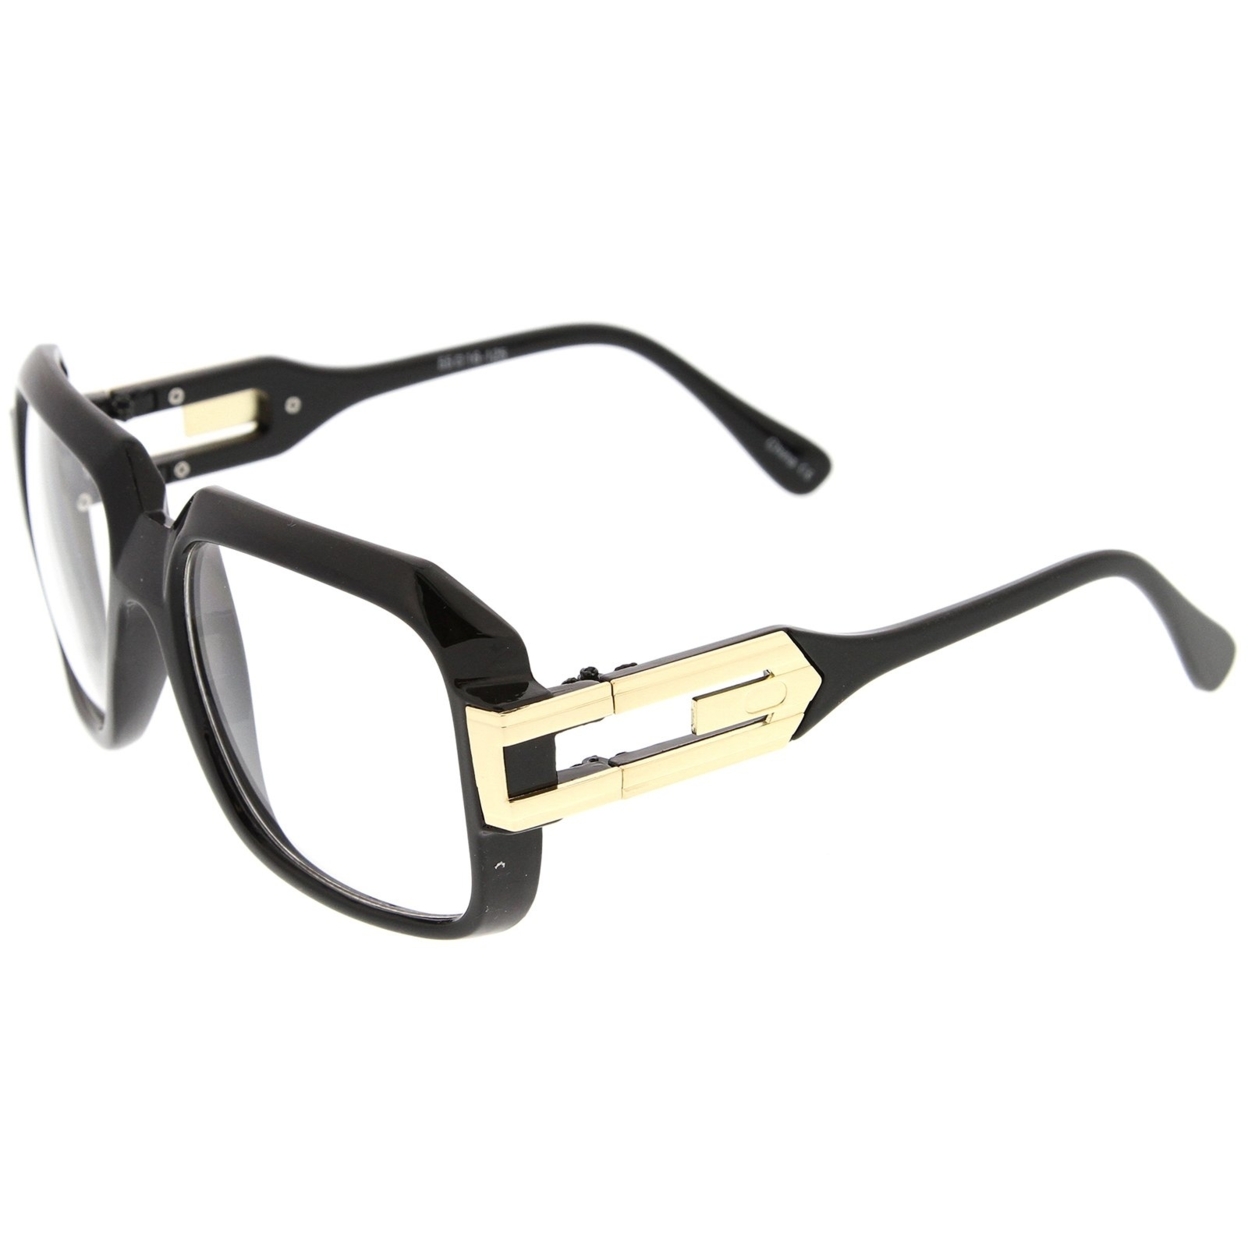 Large Retro Hip Hop Style Clear Lens Square Eyeglasses 54mm - Shiny Black-Gold / Clear